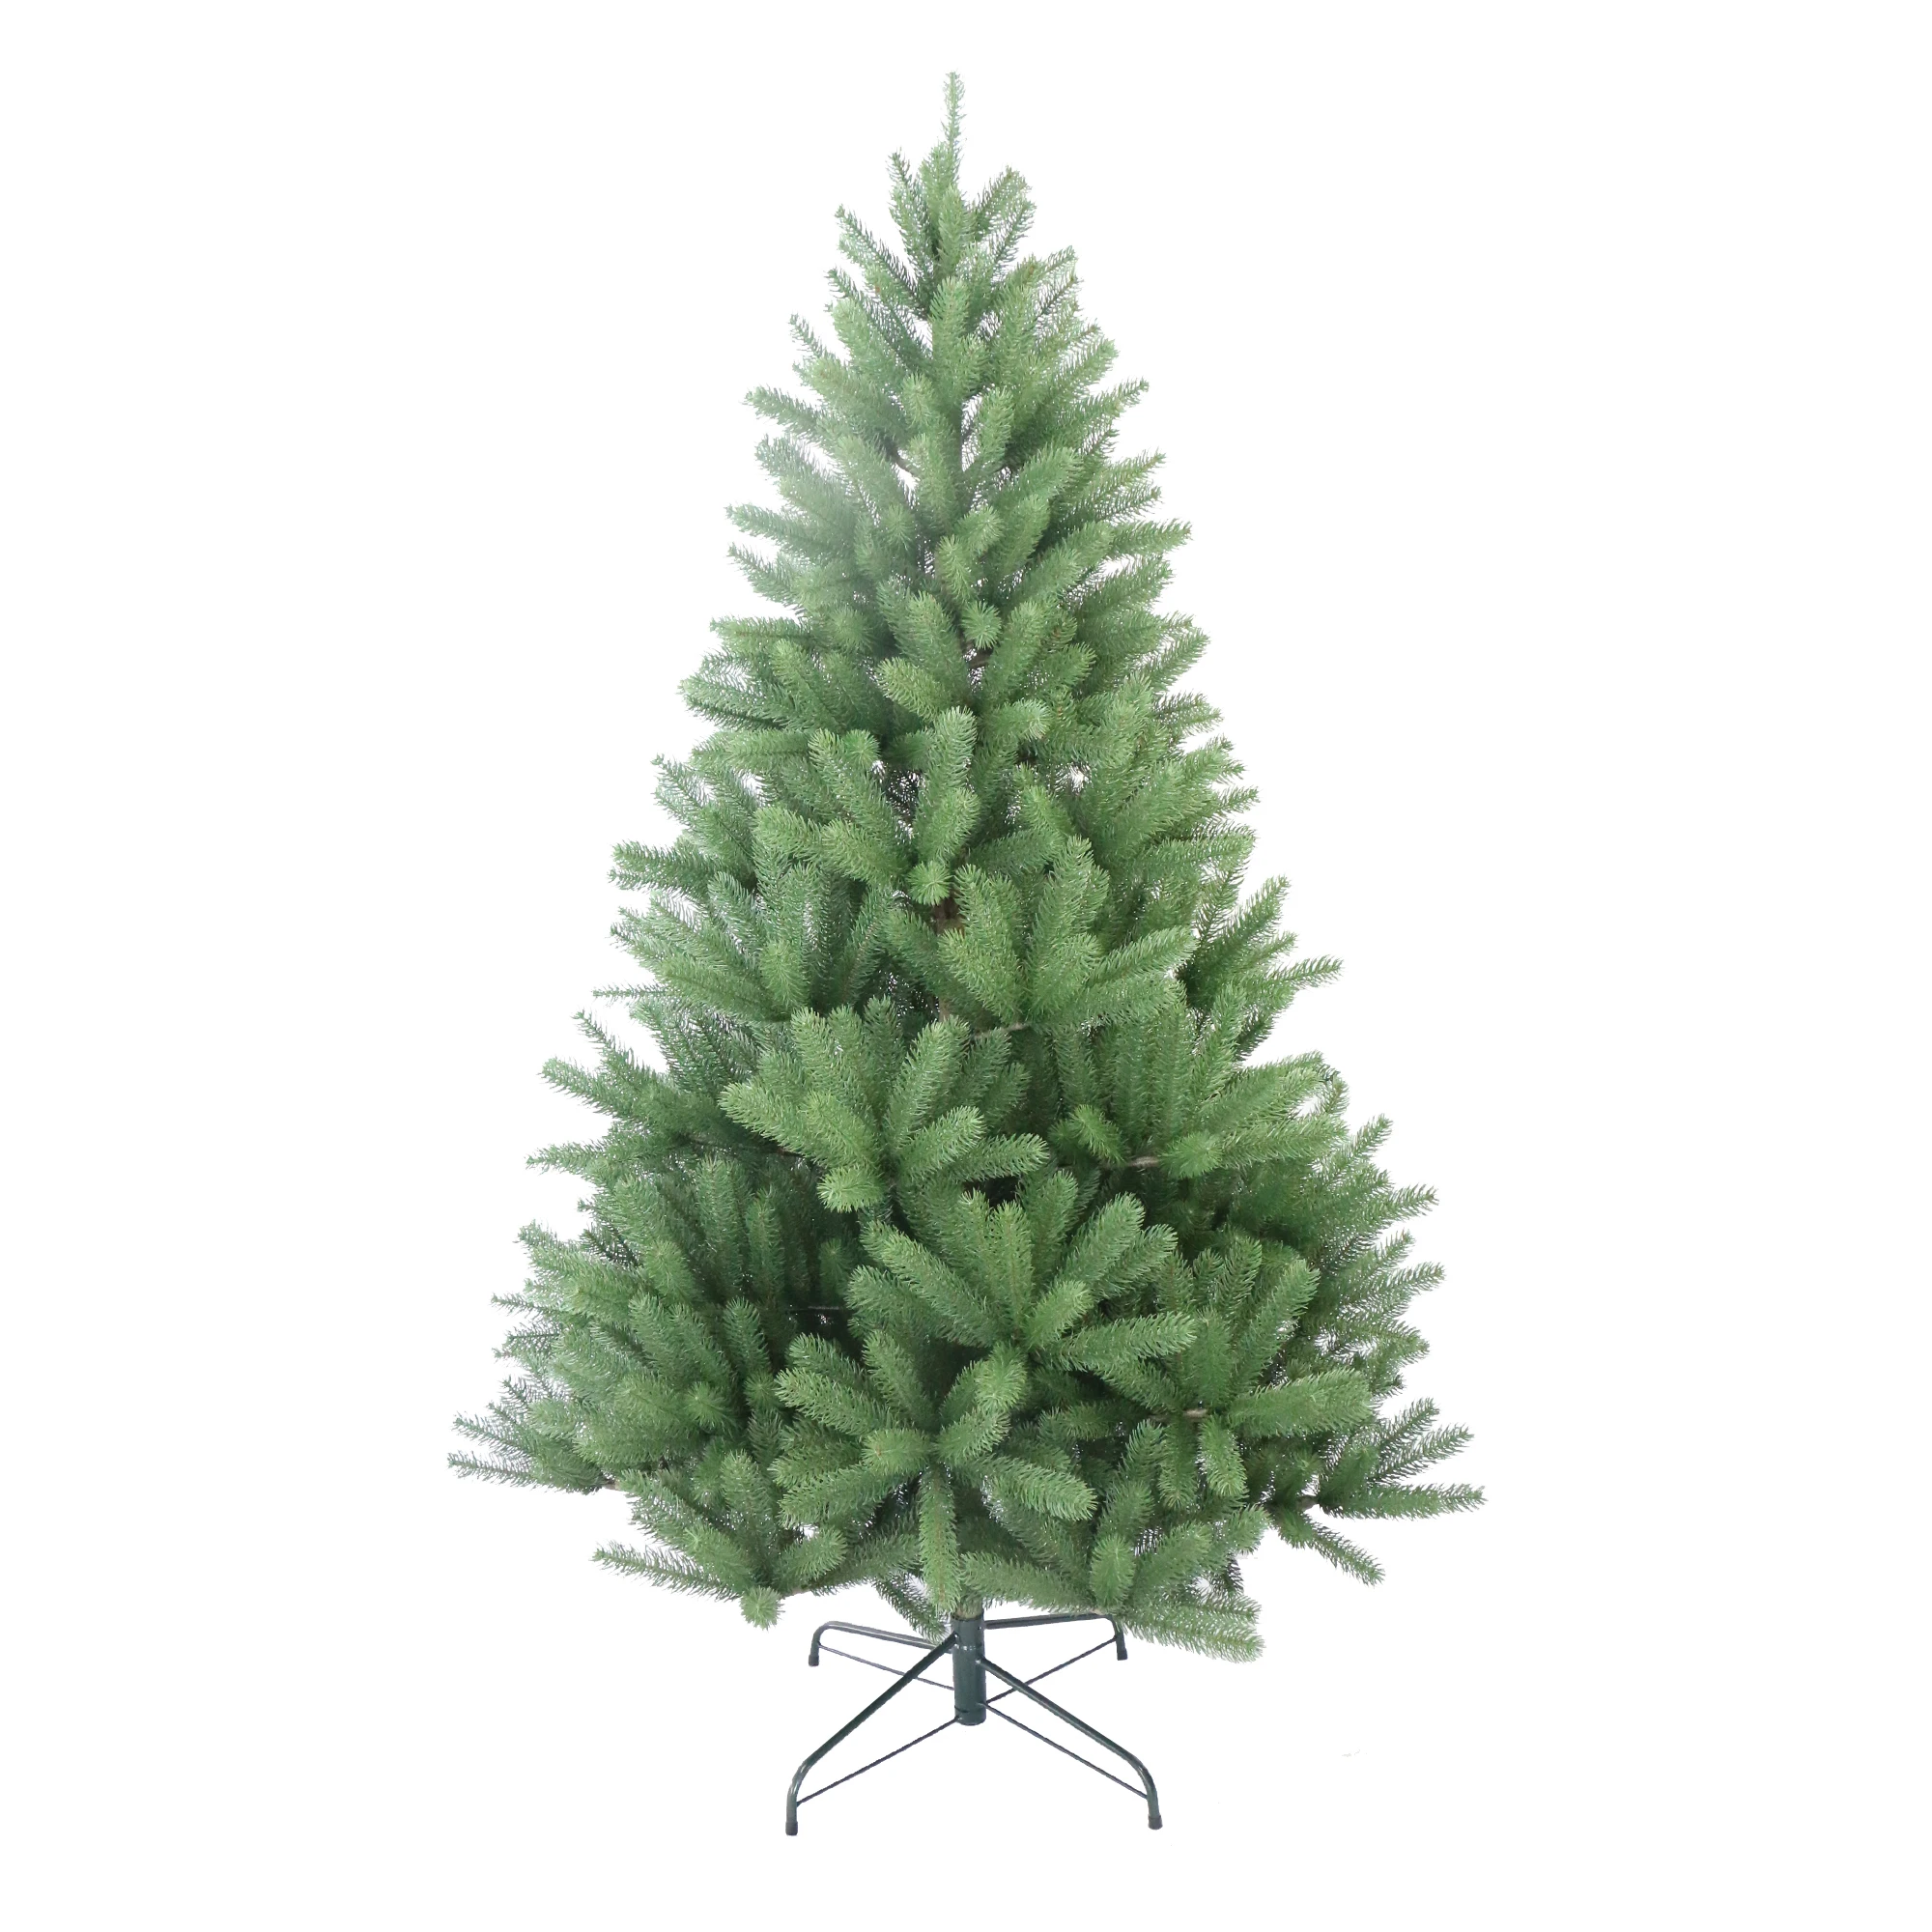 SALE ! 180cm !! Luxury Artificial Green Crystal Christmas Tree # 6ft 